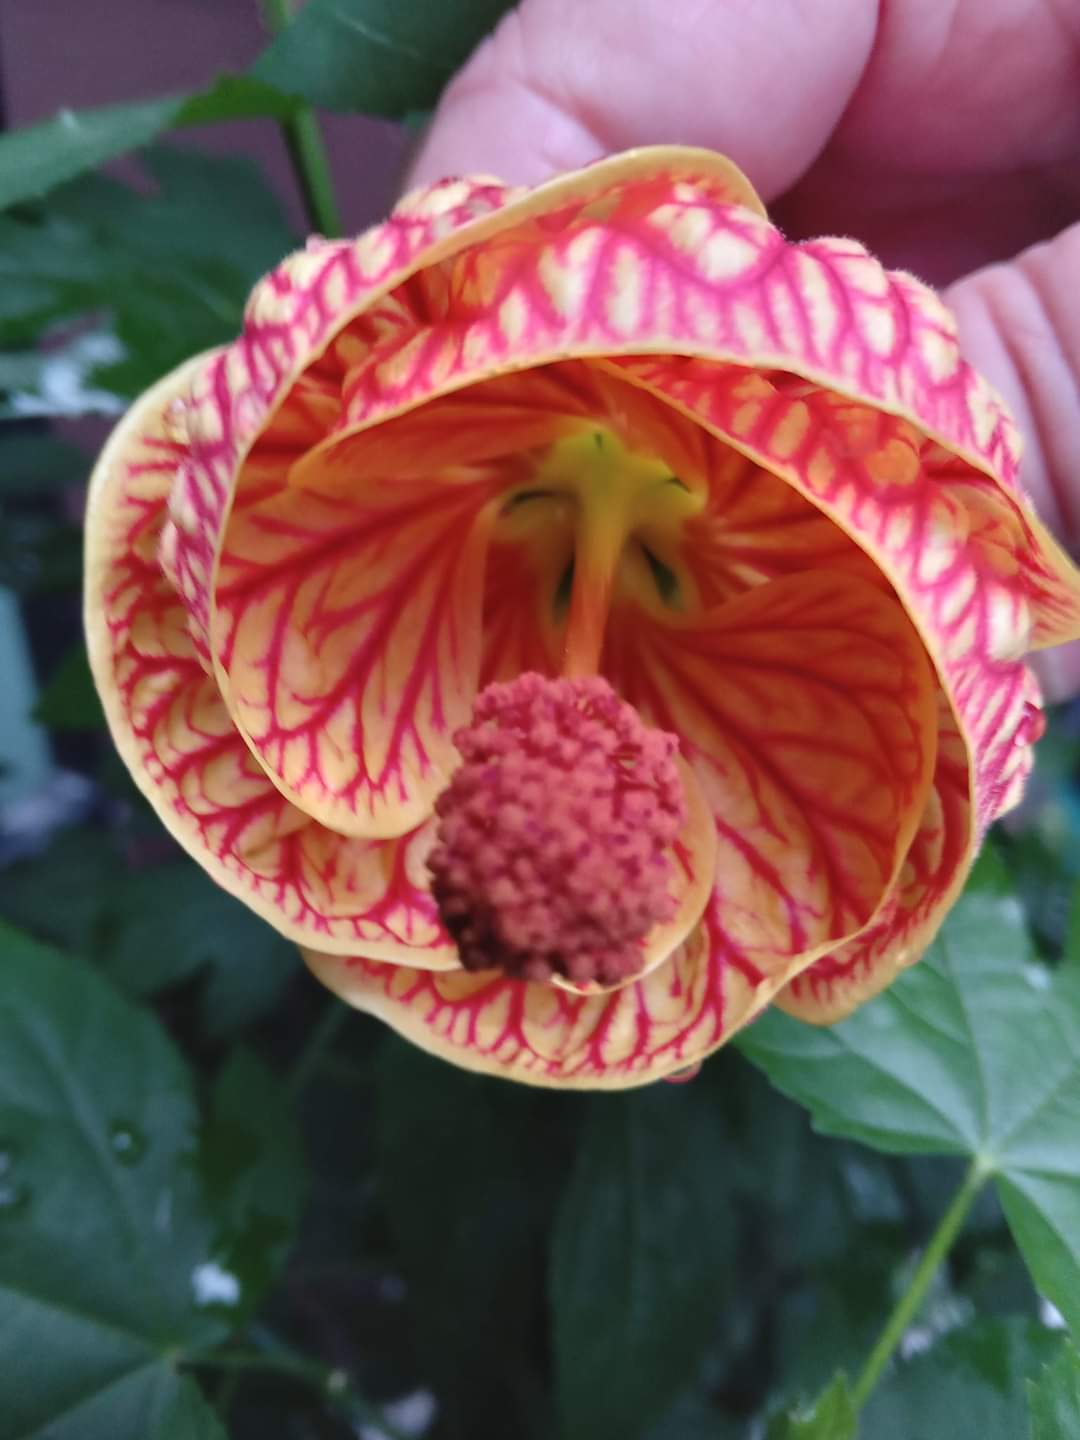 Red and yellow flower in Vietnam